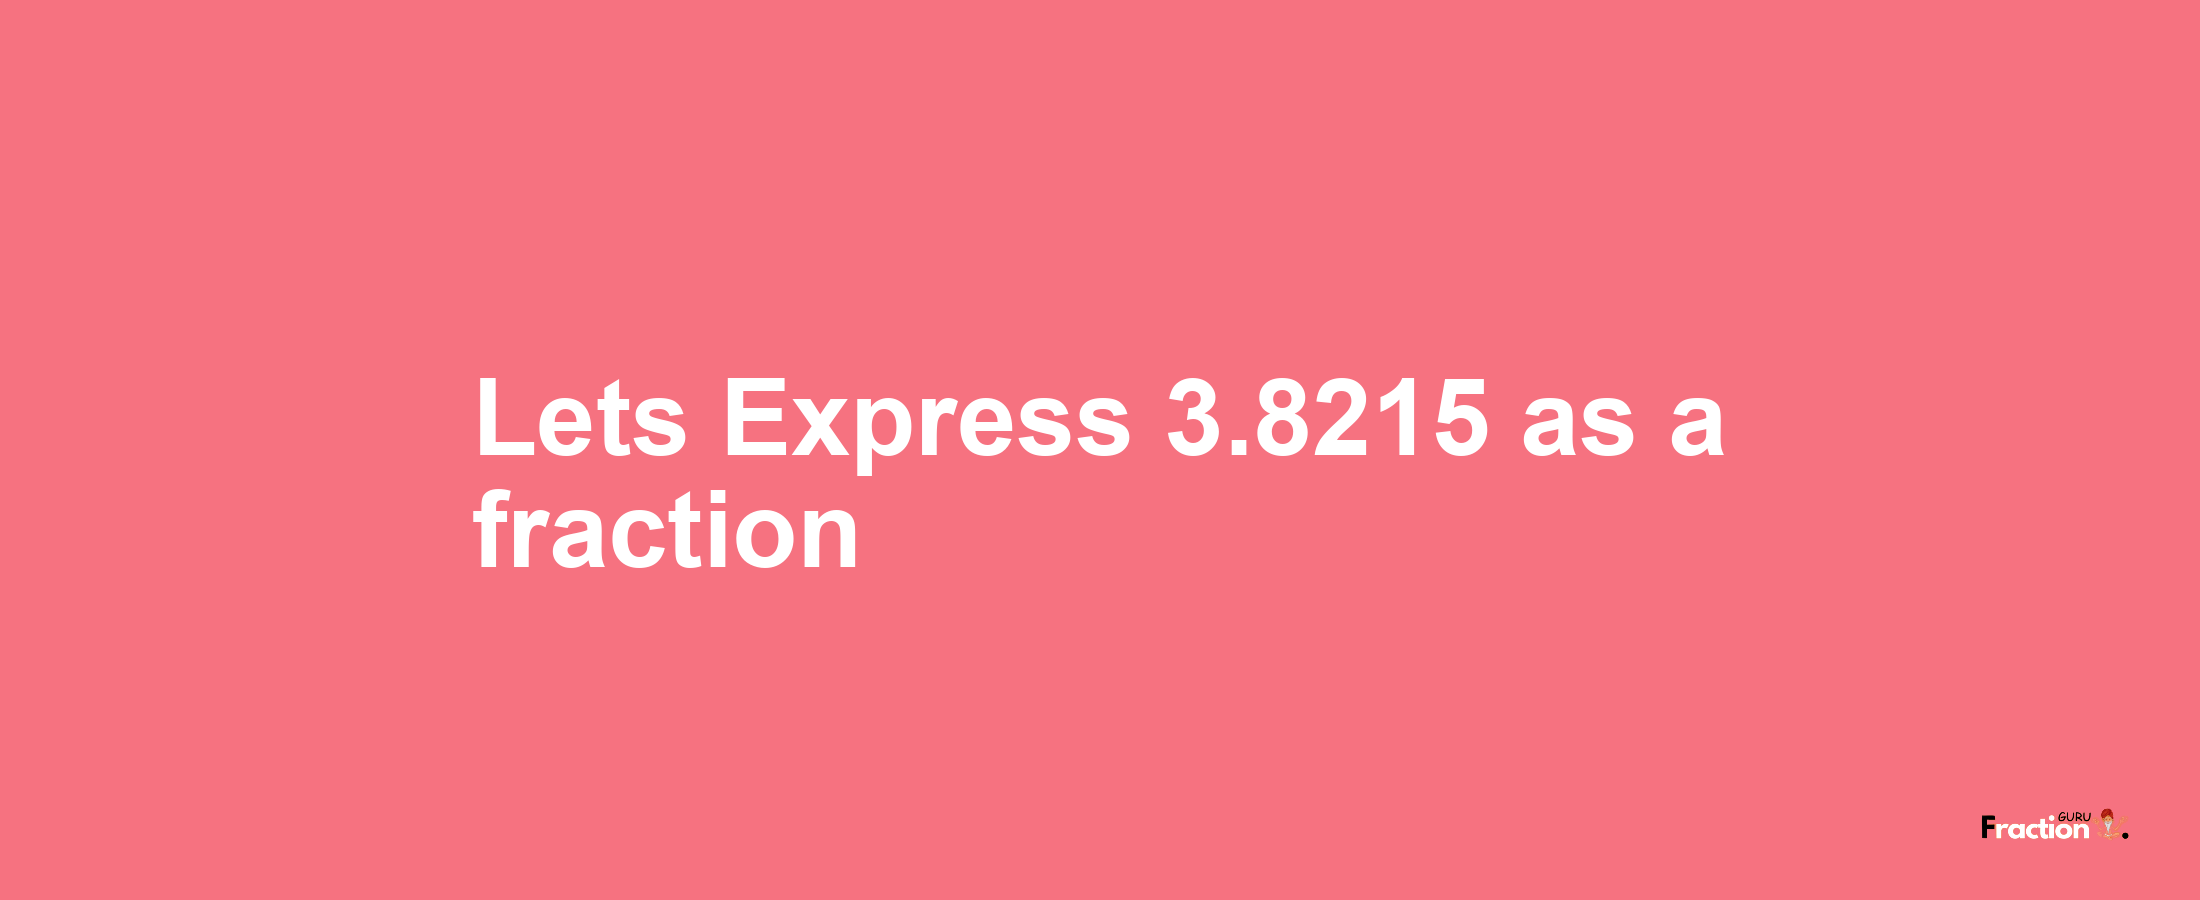 Lets Express 3.8215 as afraction